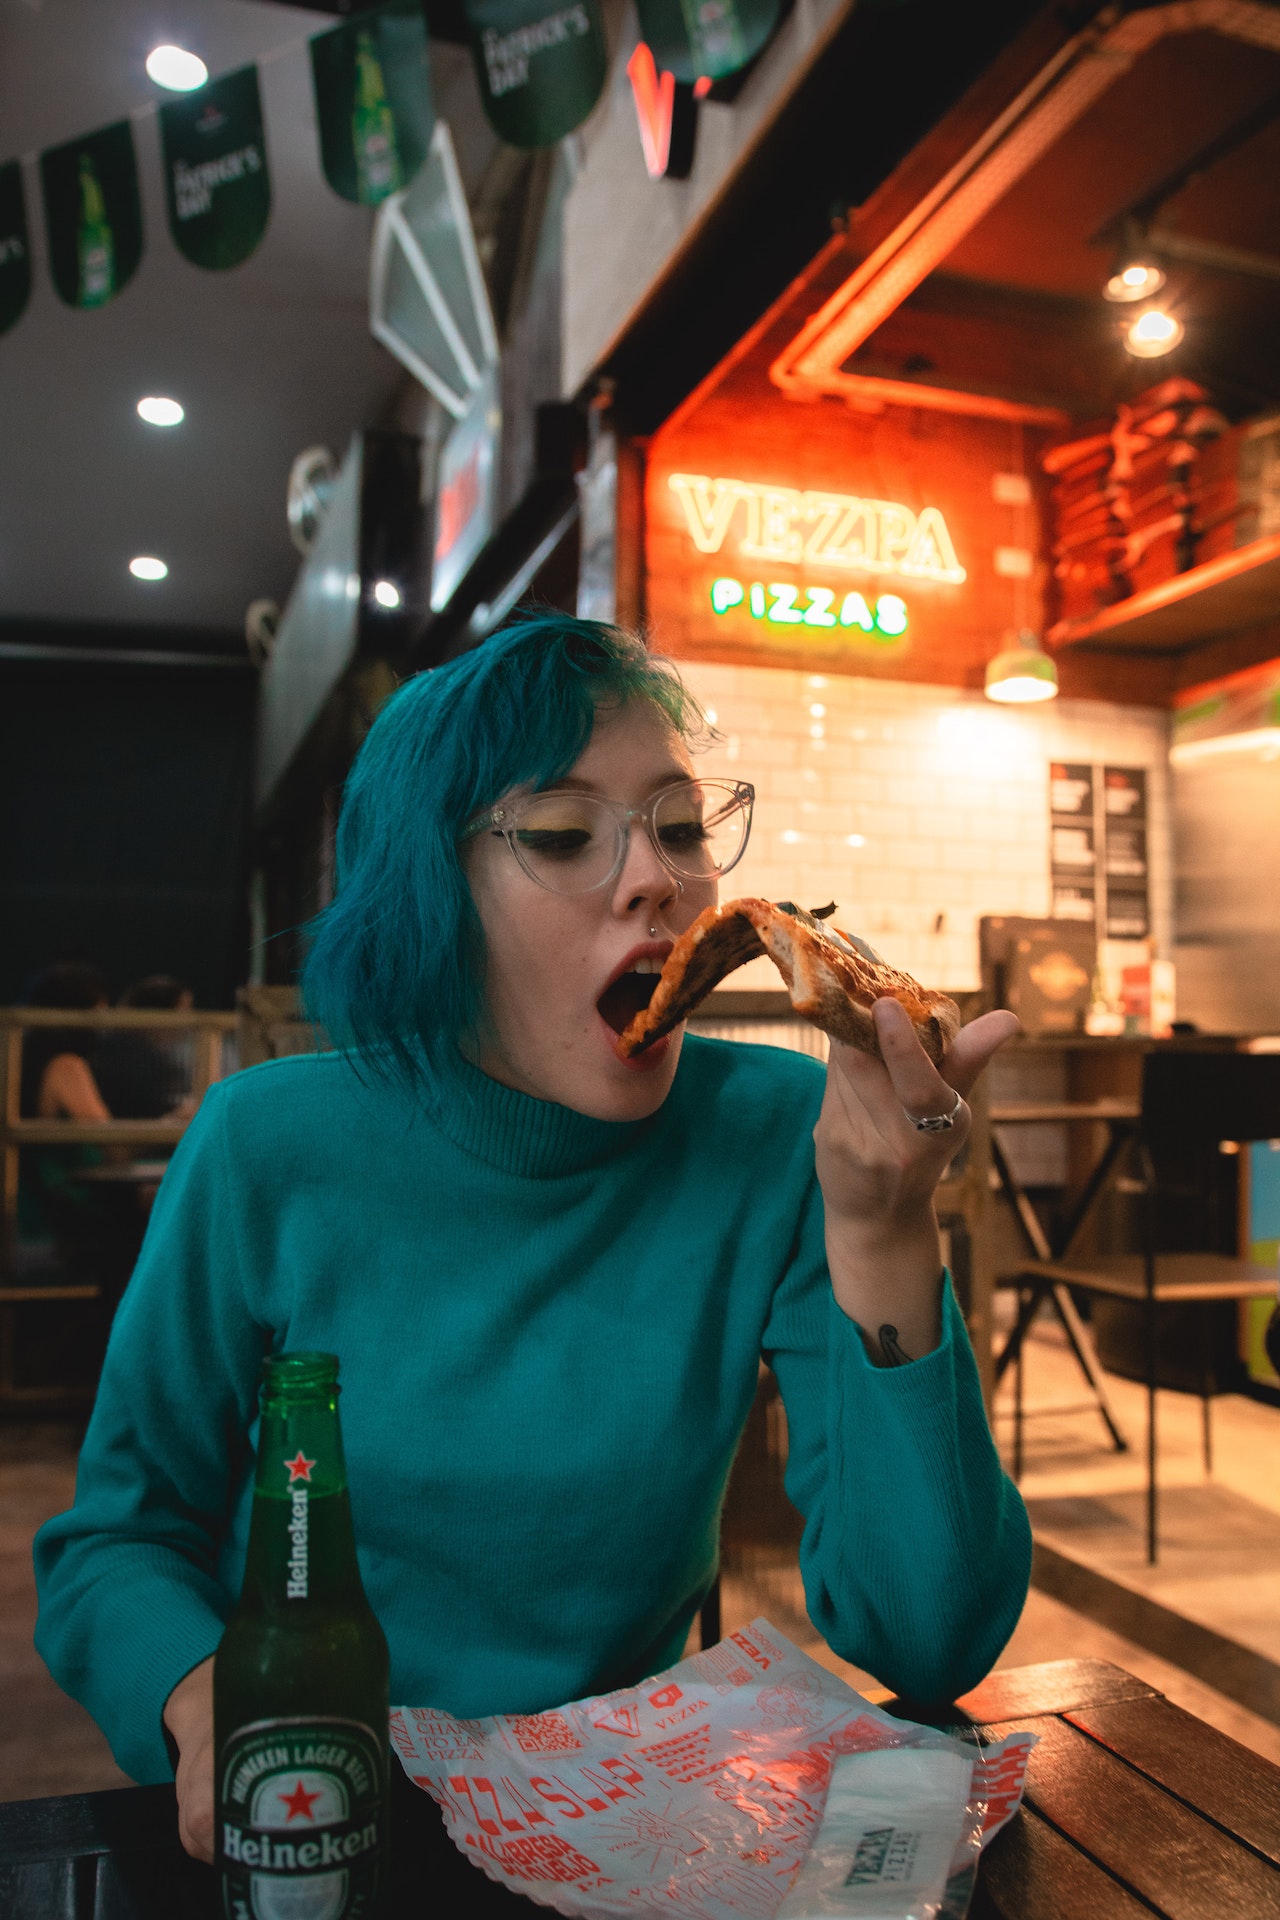 Photo by Athena: https://www.pexels.com/photo/woman-eating-pizza-2323182/